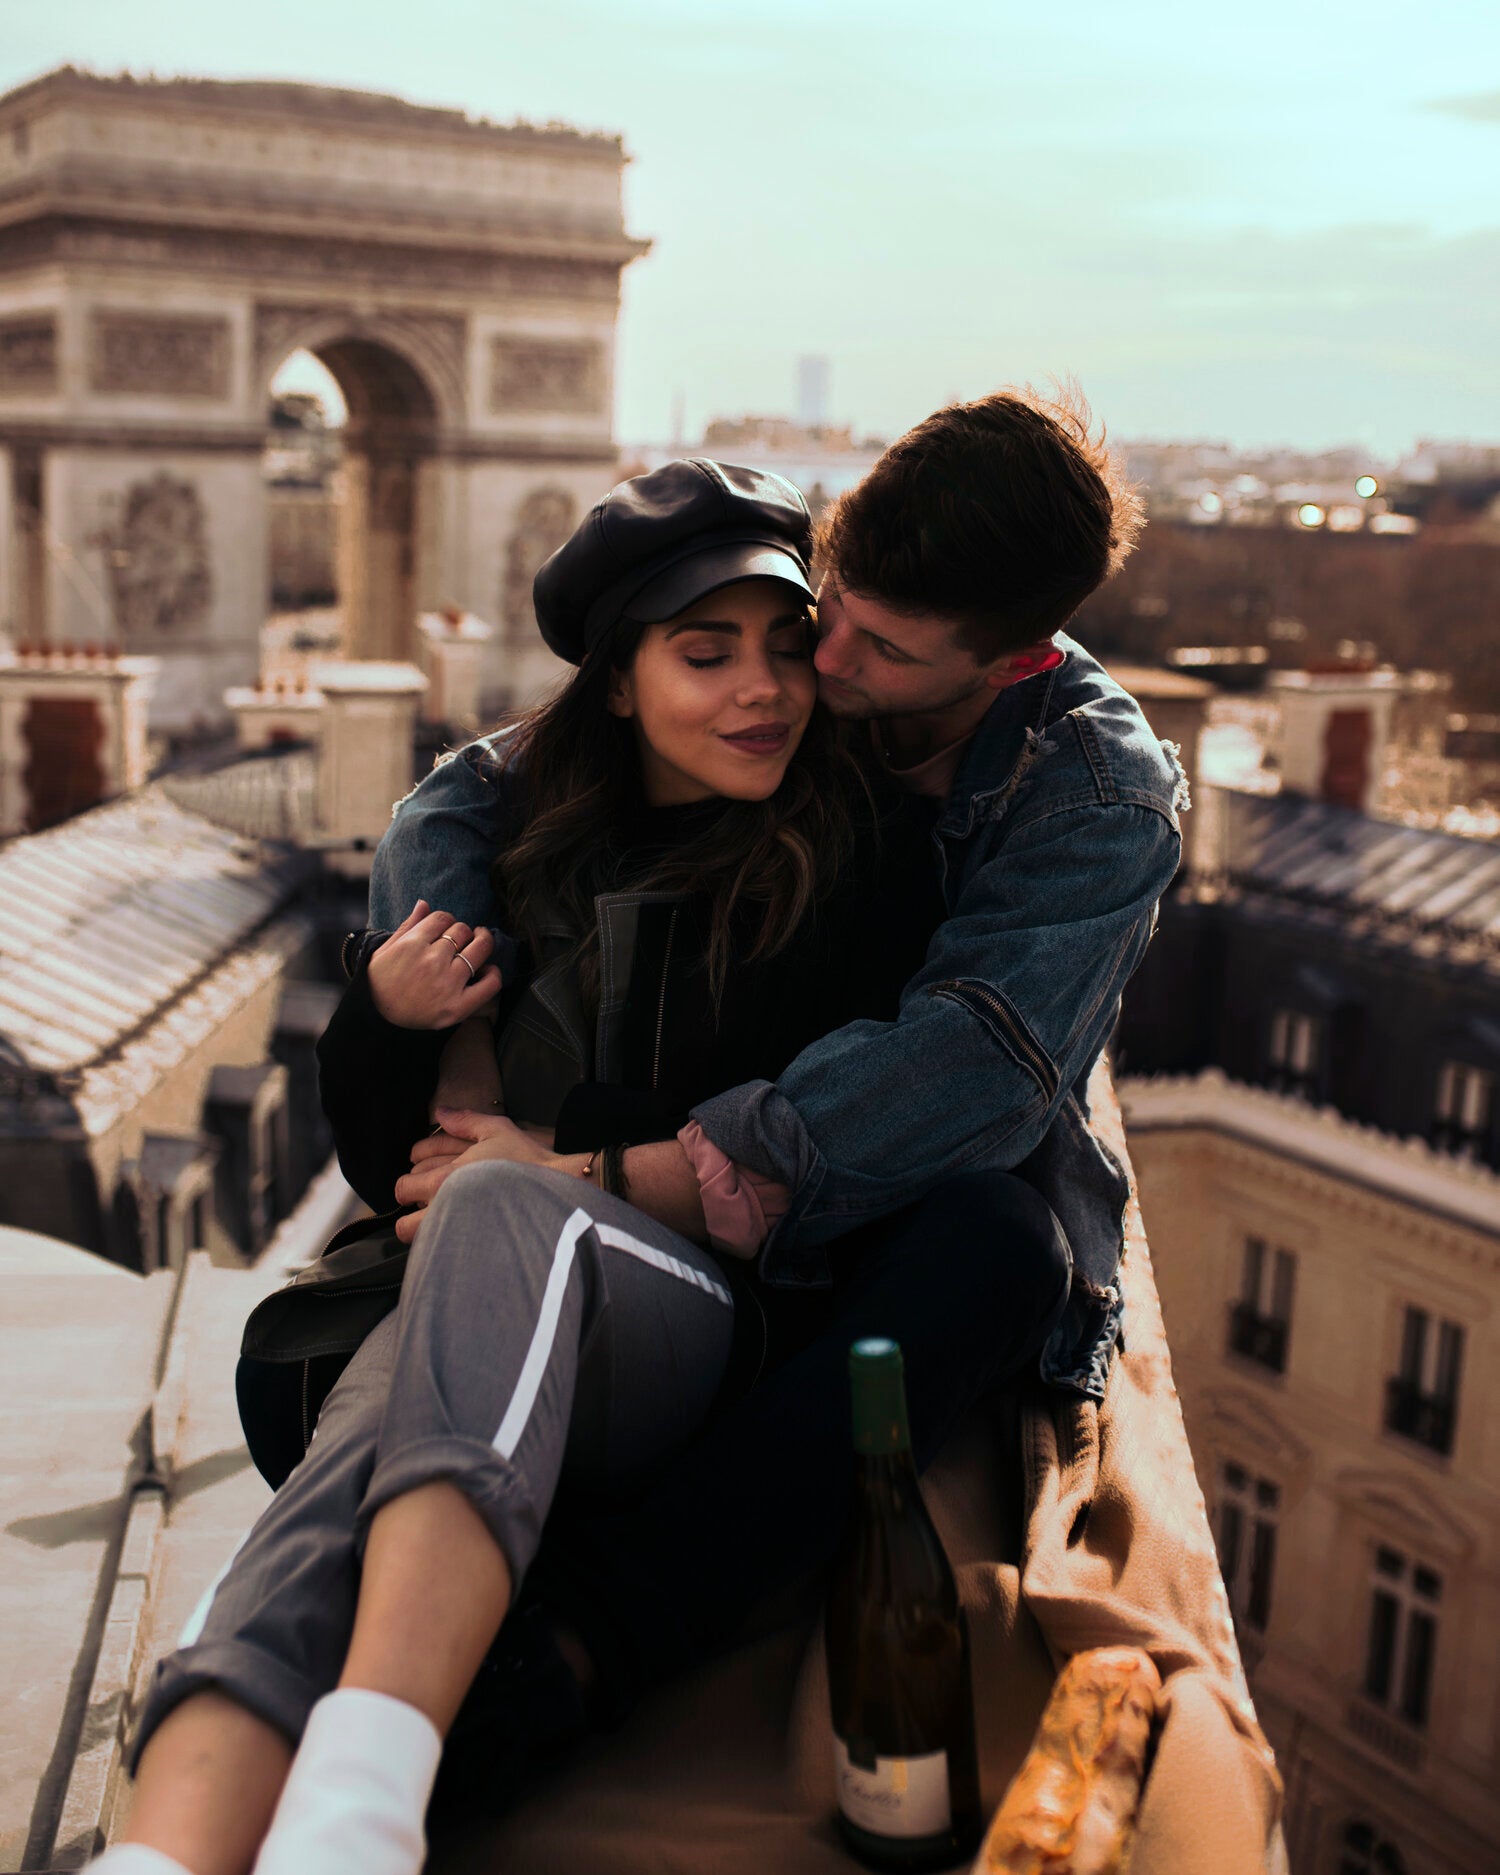 WhatTheChic and Lost LeBlanc on rooftop in Paris with Arc de Triomphe behind